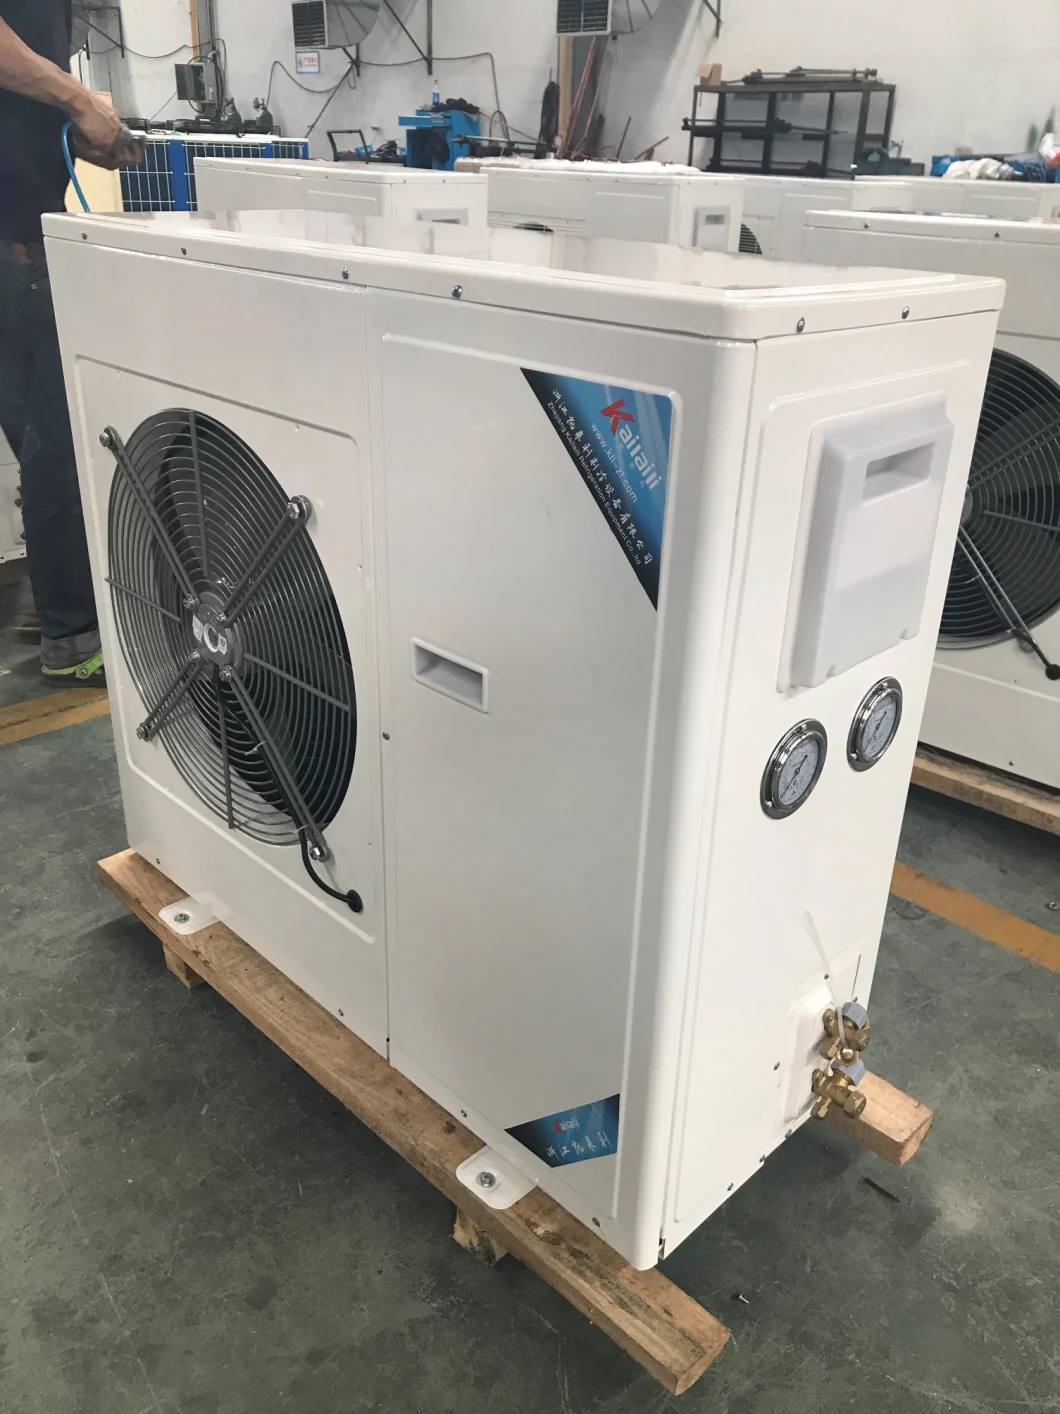 Combined Cold Storage Emerson Copeland Compressor Refrigeration Condensing Units From China